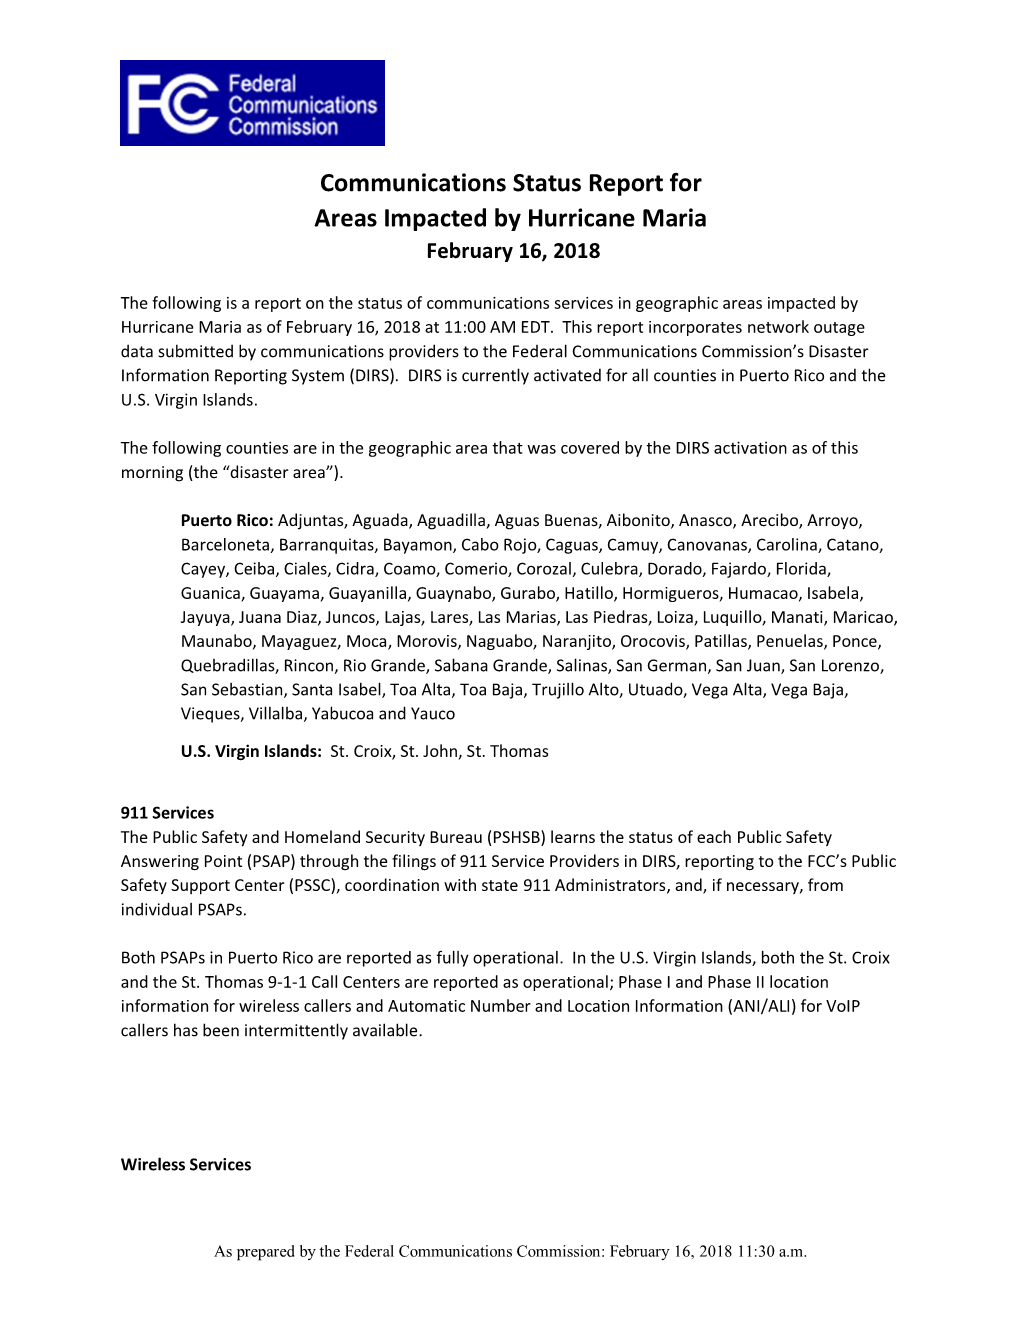 Communications Status Report for Areas Impacted by Hurricane Maria February 16, 2018